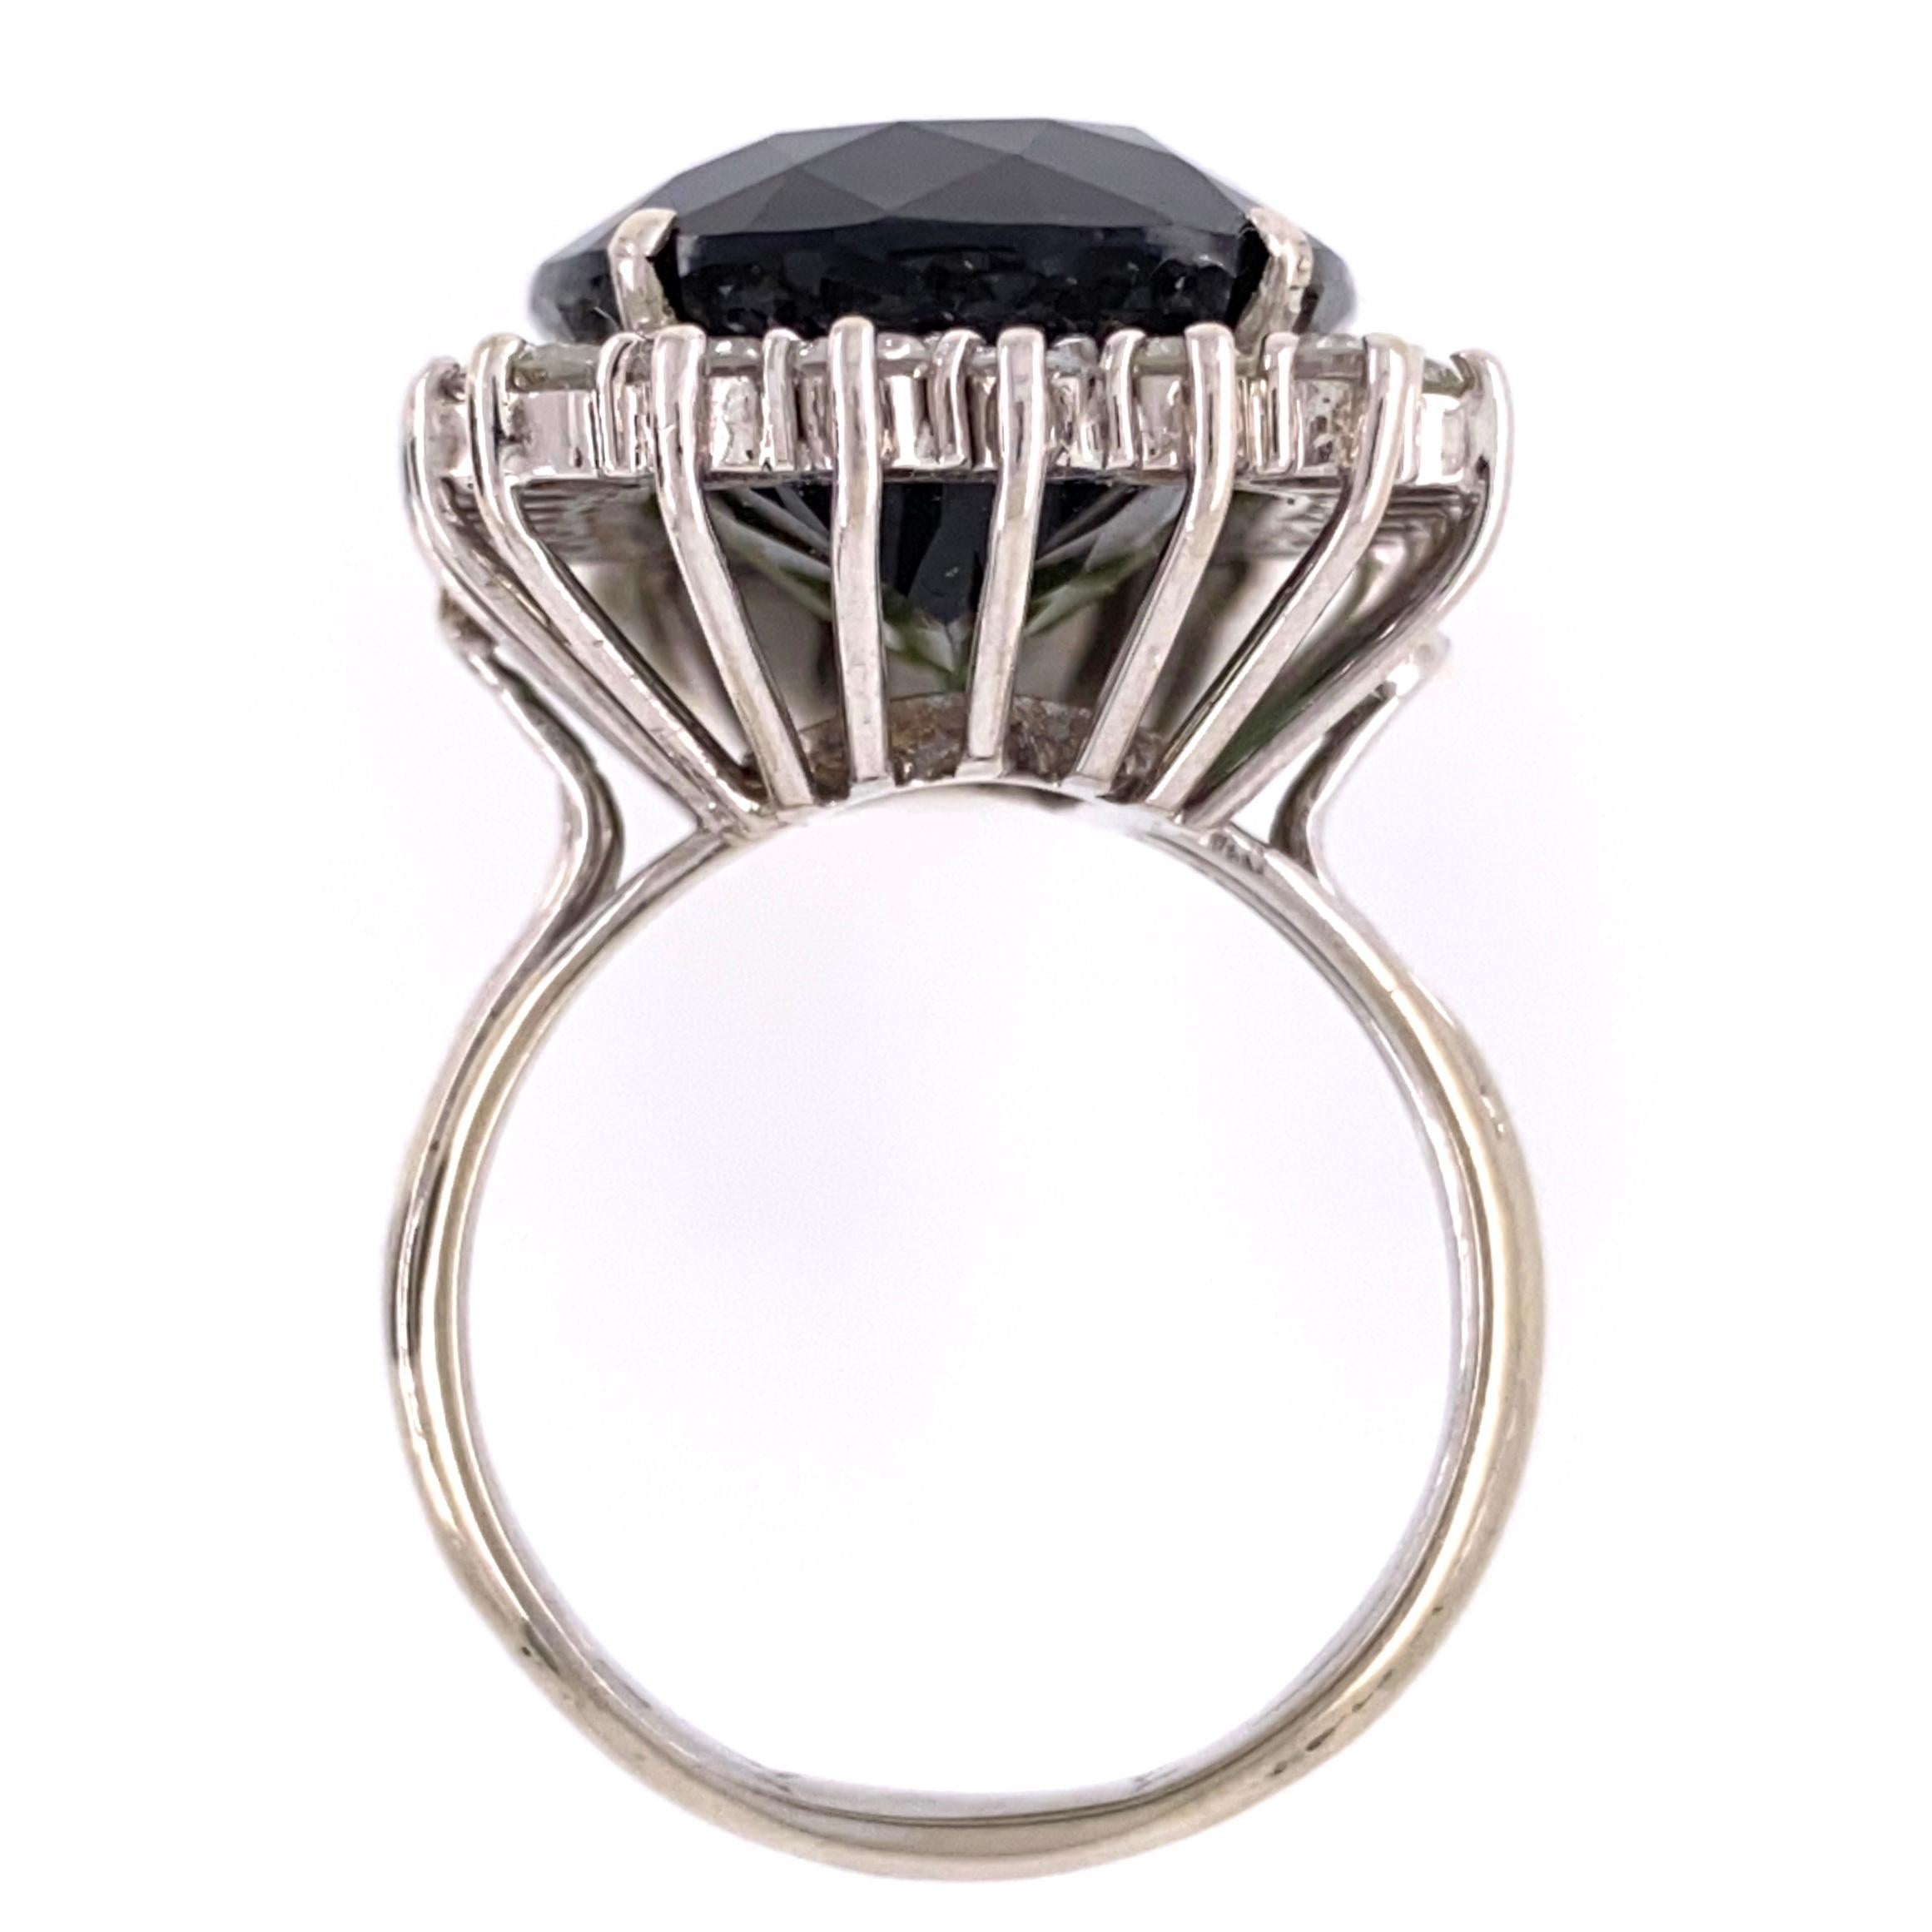 18.63 Carat Green Tourmaline Diamond Gold Cocktail Ring Estate Fine Jewelry In Excellent Condition For Sale In Montreal, QC